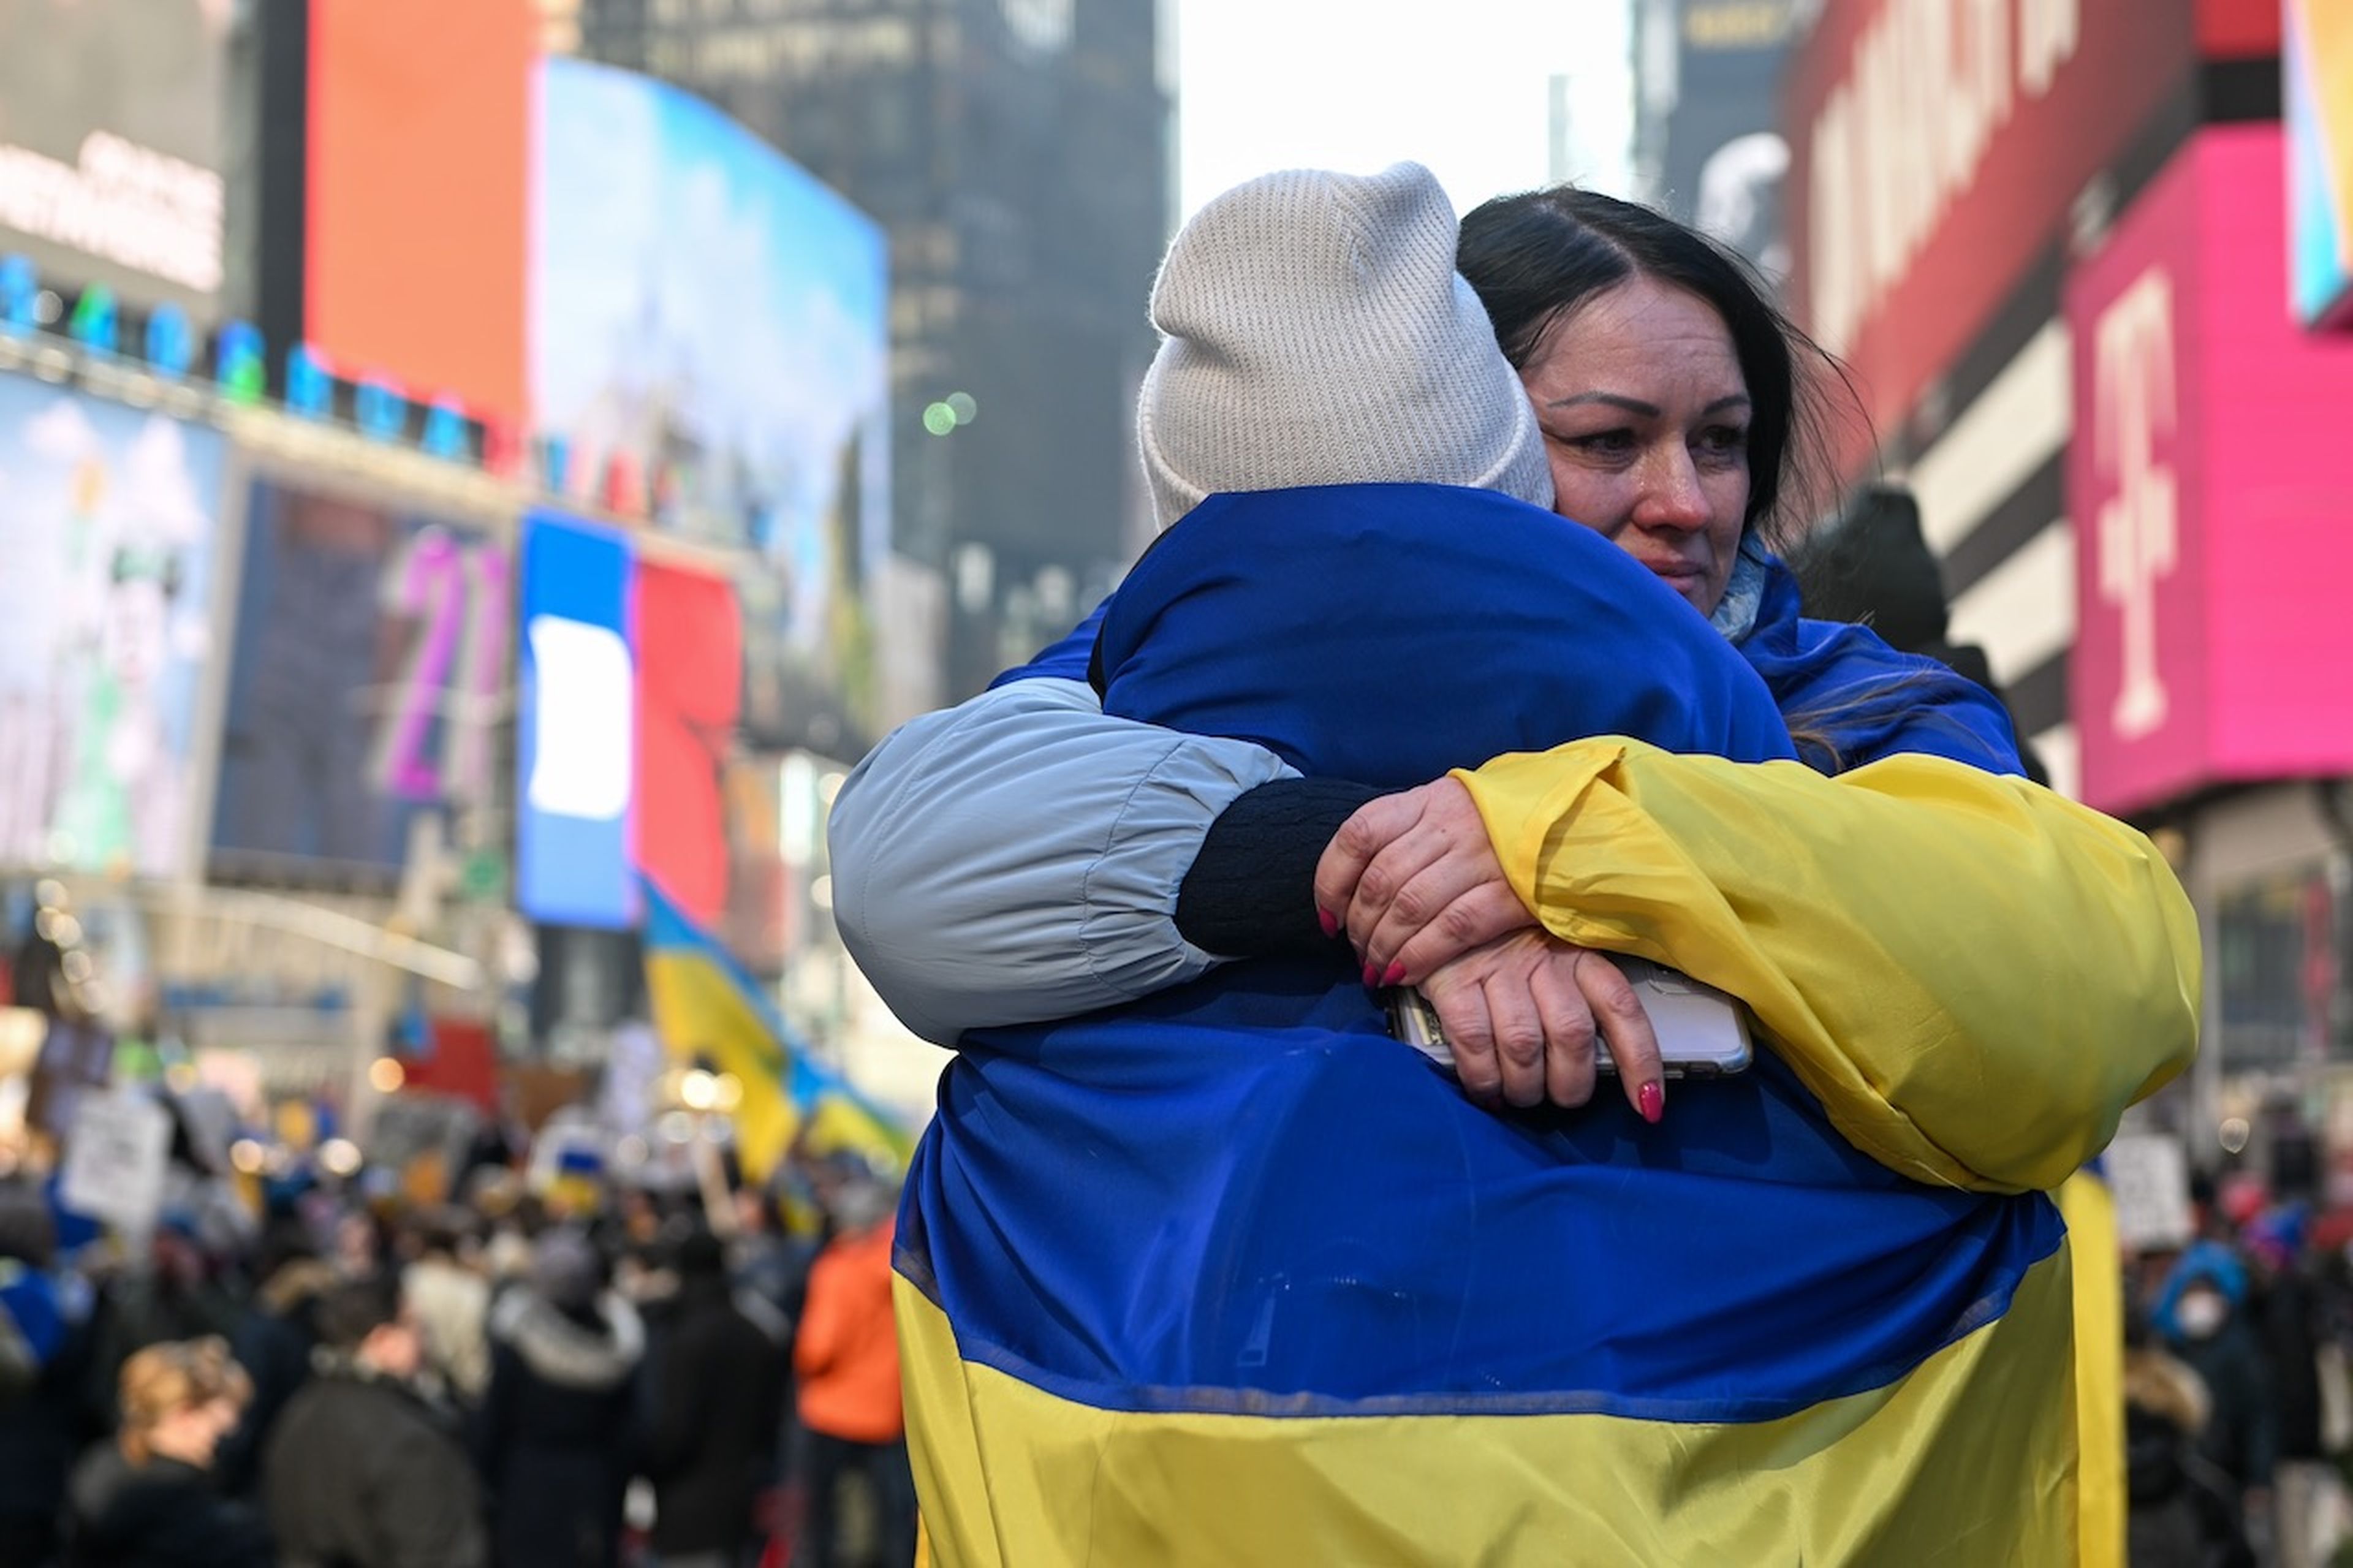 Two people draped in Ukrainian flags embrace at a &#8220;Stand With Ukraine&#8221; rally in Times Square on Feb. 26, 2022, in New York City. Cybersecurity vendors are rallying to provide free products and services to support Ukraine amid the Russian invasion. (Photo by Alexi Rosenfeld/Getty Images)